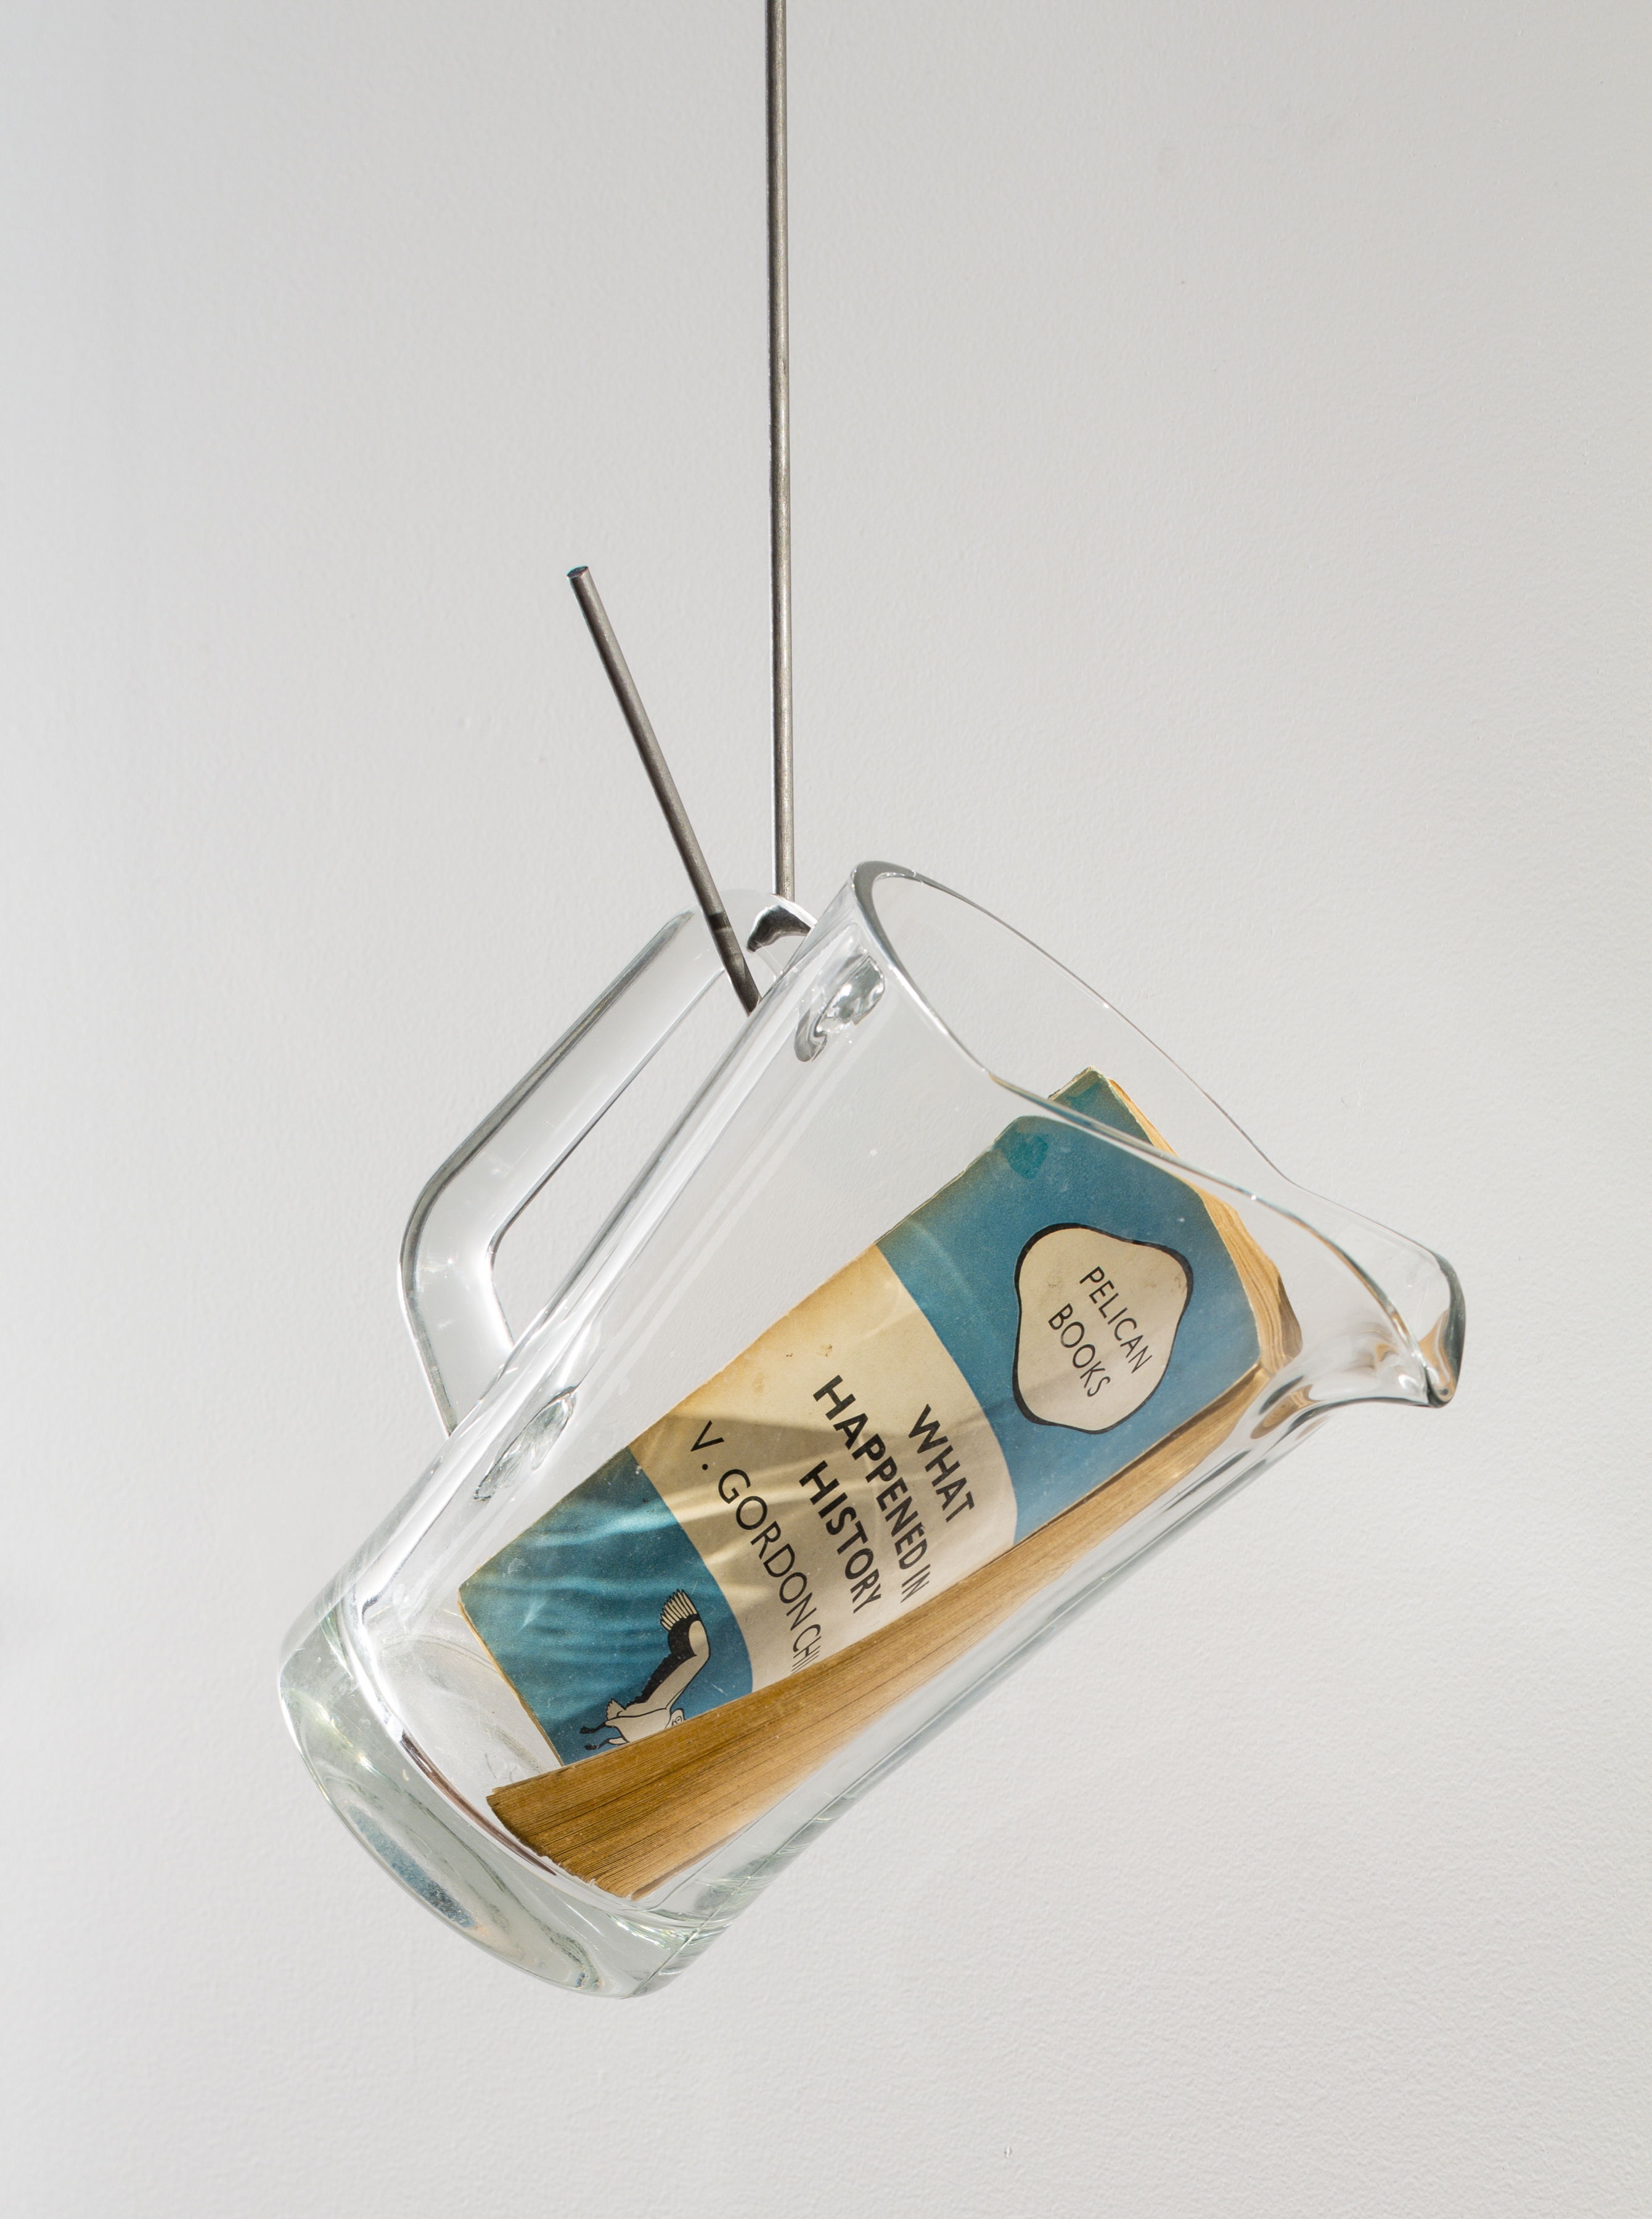 &amp;nbsp;

RICHARD WENTWORTH
&amp;nbsp;

Various Truths
2017
glass pitcher, book, and hook
48 x 9 x 8 inches
&amp;nbsp; (121.9 x 22.9 x 20.3 cm)
PF4775


Provenance:
the artist


Exhibited:
Peter Freeman, Inc., New York.&amp;nbsp;Richard Wentworth: Now and Then&amp;nbsp;(7 November &amp;ndash; 22 December 2017)

Peter Freeman, Inc., New York.&amp;nbsp;RHE: Jan Dibbets, Helen Mirra, Fiona Tan, Richard Wentworth&amp;nbsp;(8 &amp;ndash; 30 January 2021)